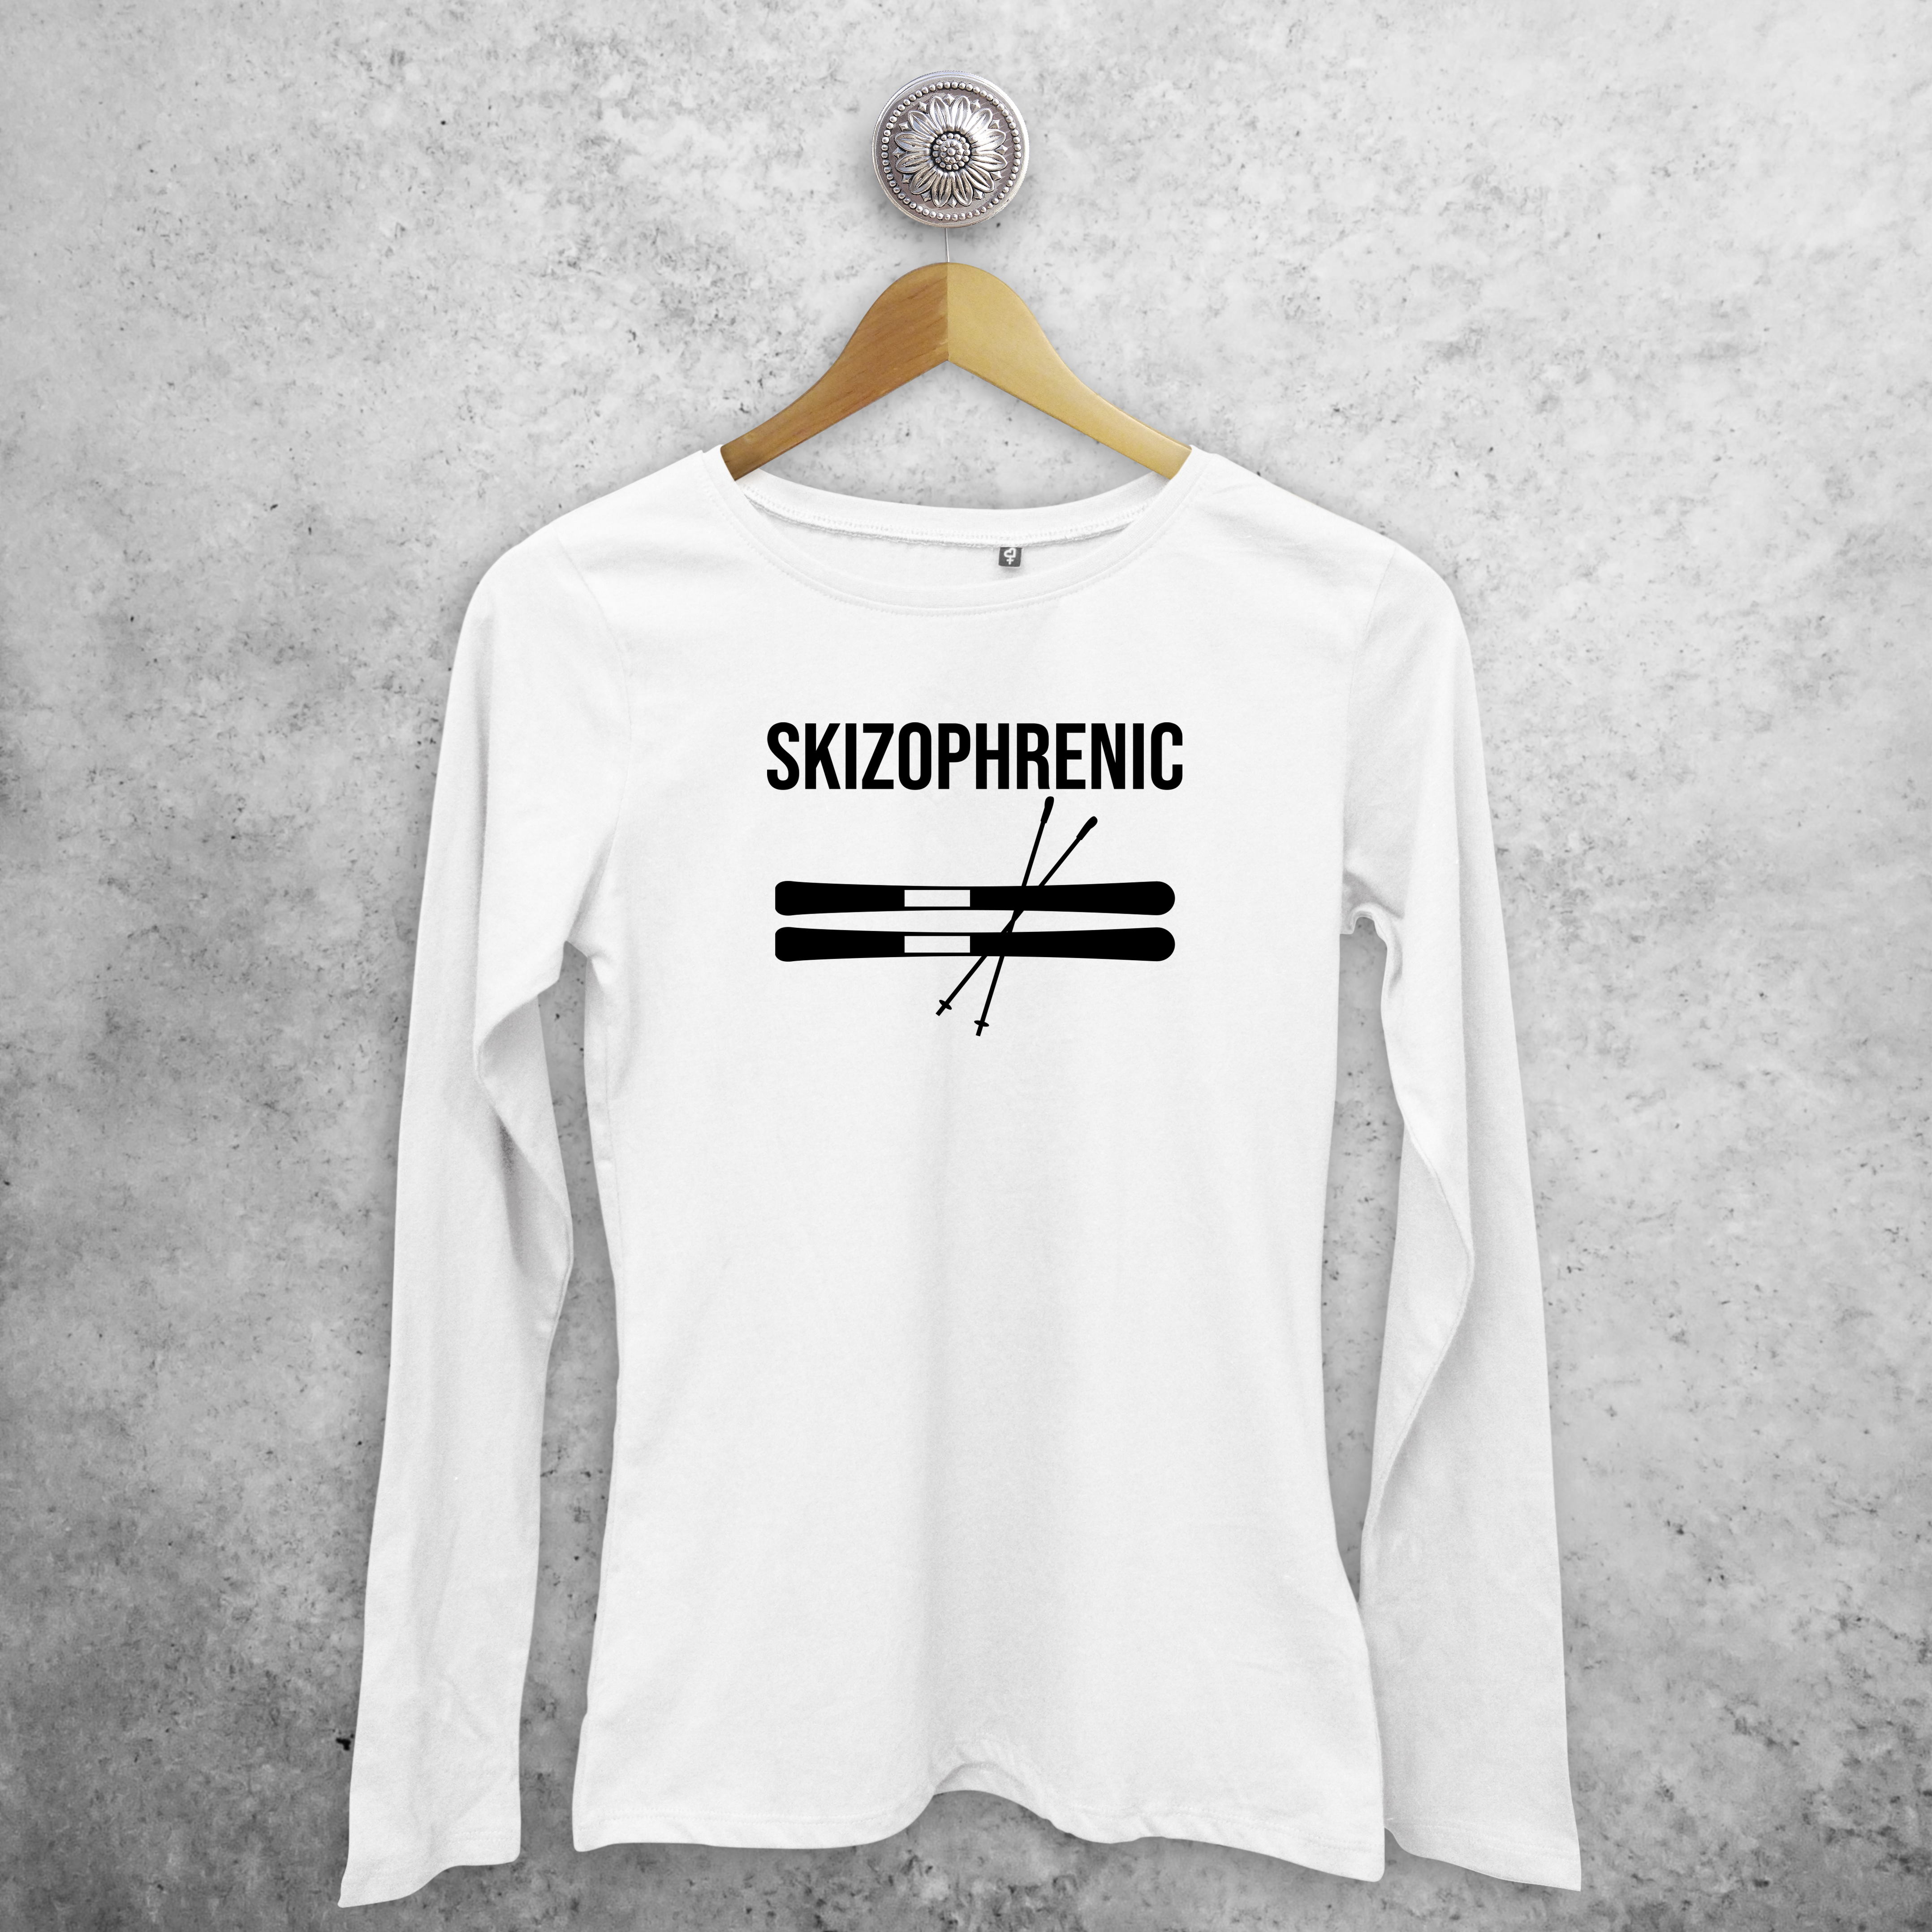 Adult shirt with long sleeves, with ‘Skizophrenic’ print by KMLeon.